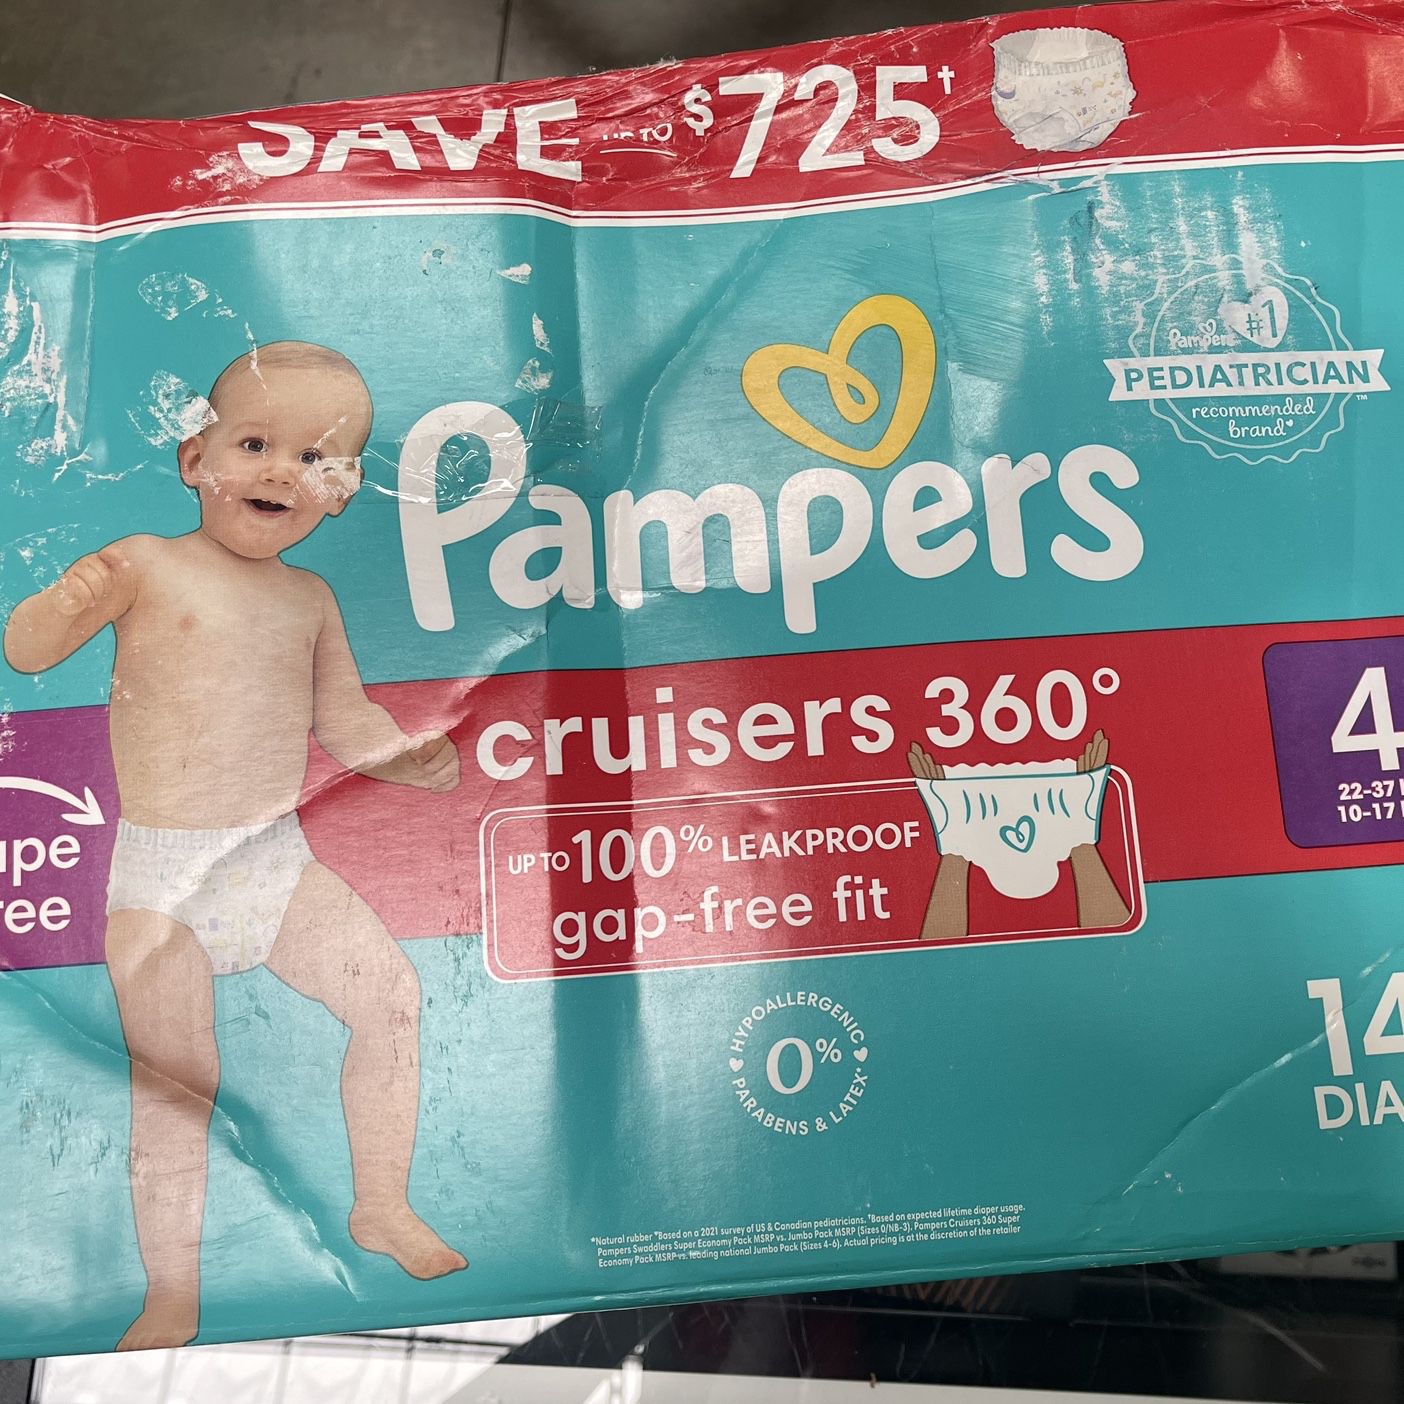 Pampers Cruisers 360 Diapers Gap-Free Fit Size 4(22 - 37 Pounds) 148 Count